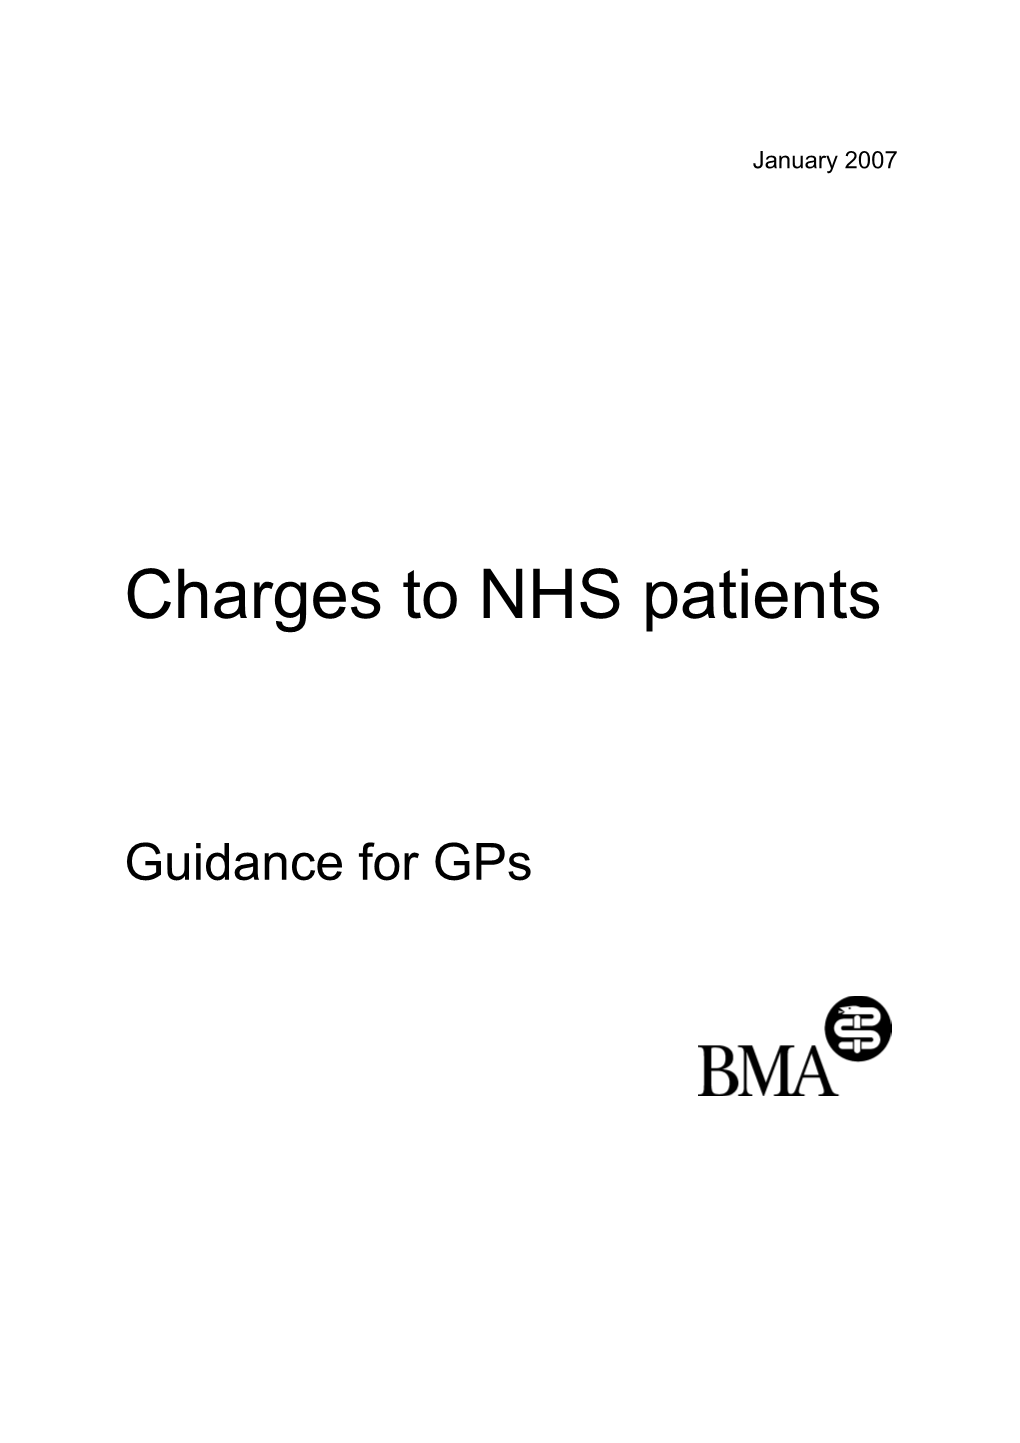 Charges to NHS Patients